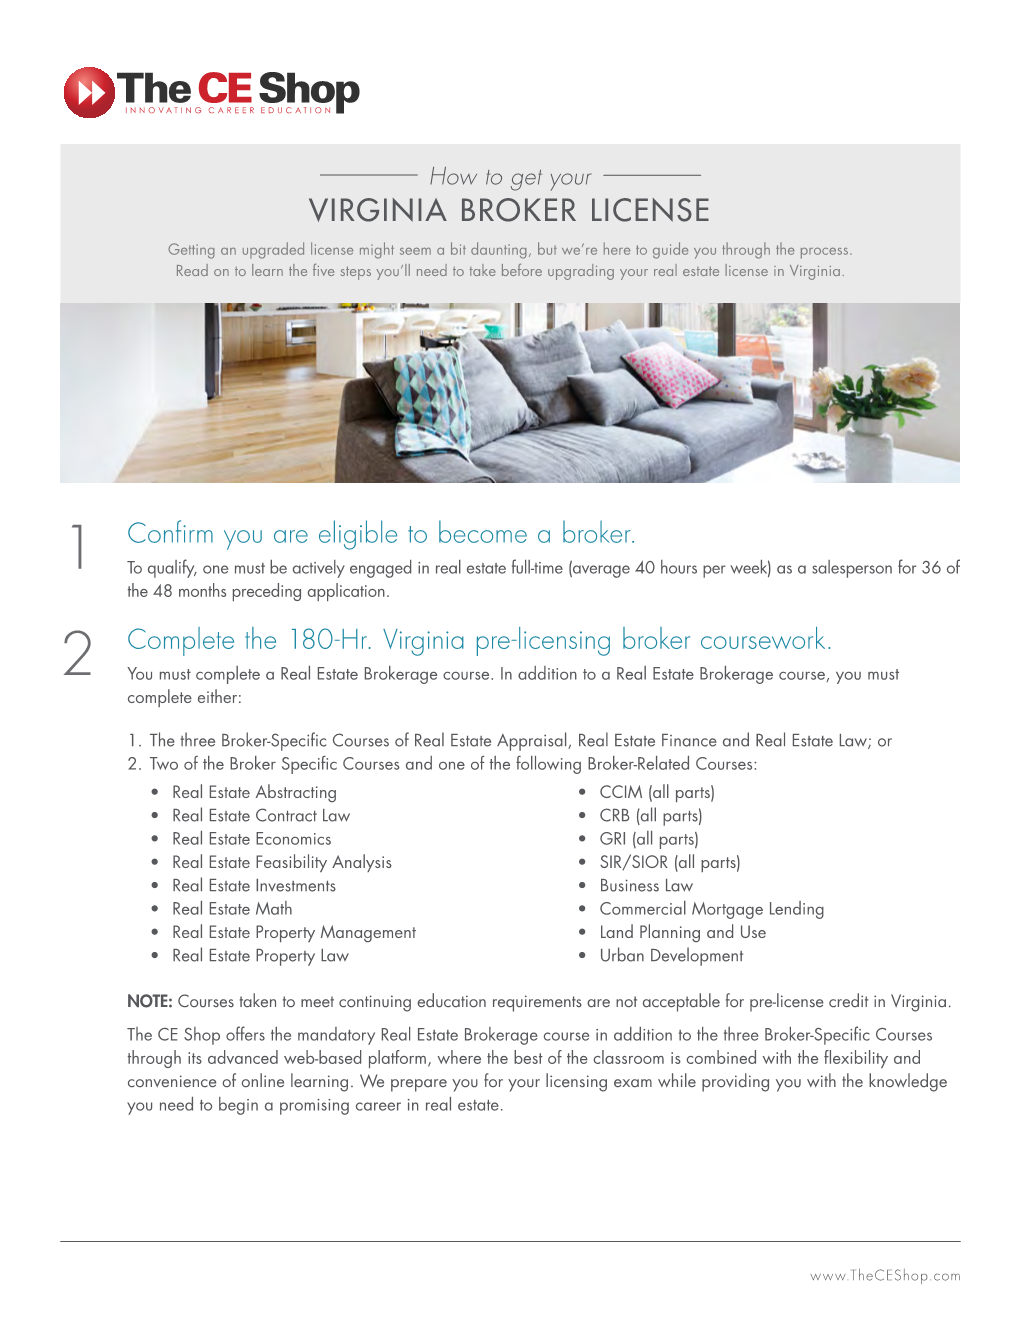 VIRGINIA BROKER LICENSE Getting an Upgraded License Might Seem a Bit Daunting, but We’Re Here to Guide You Through the Process